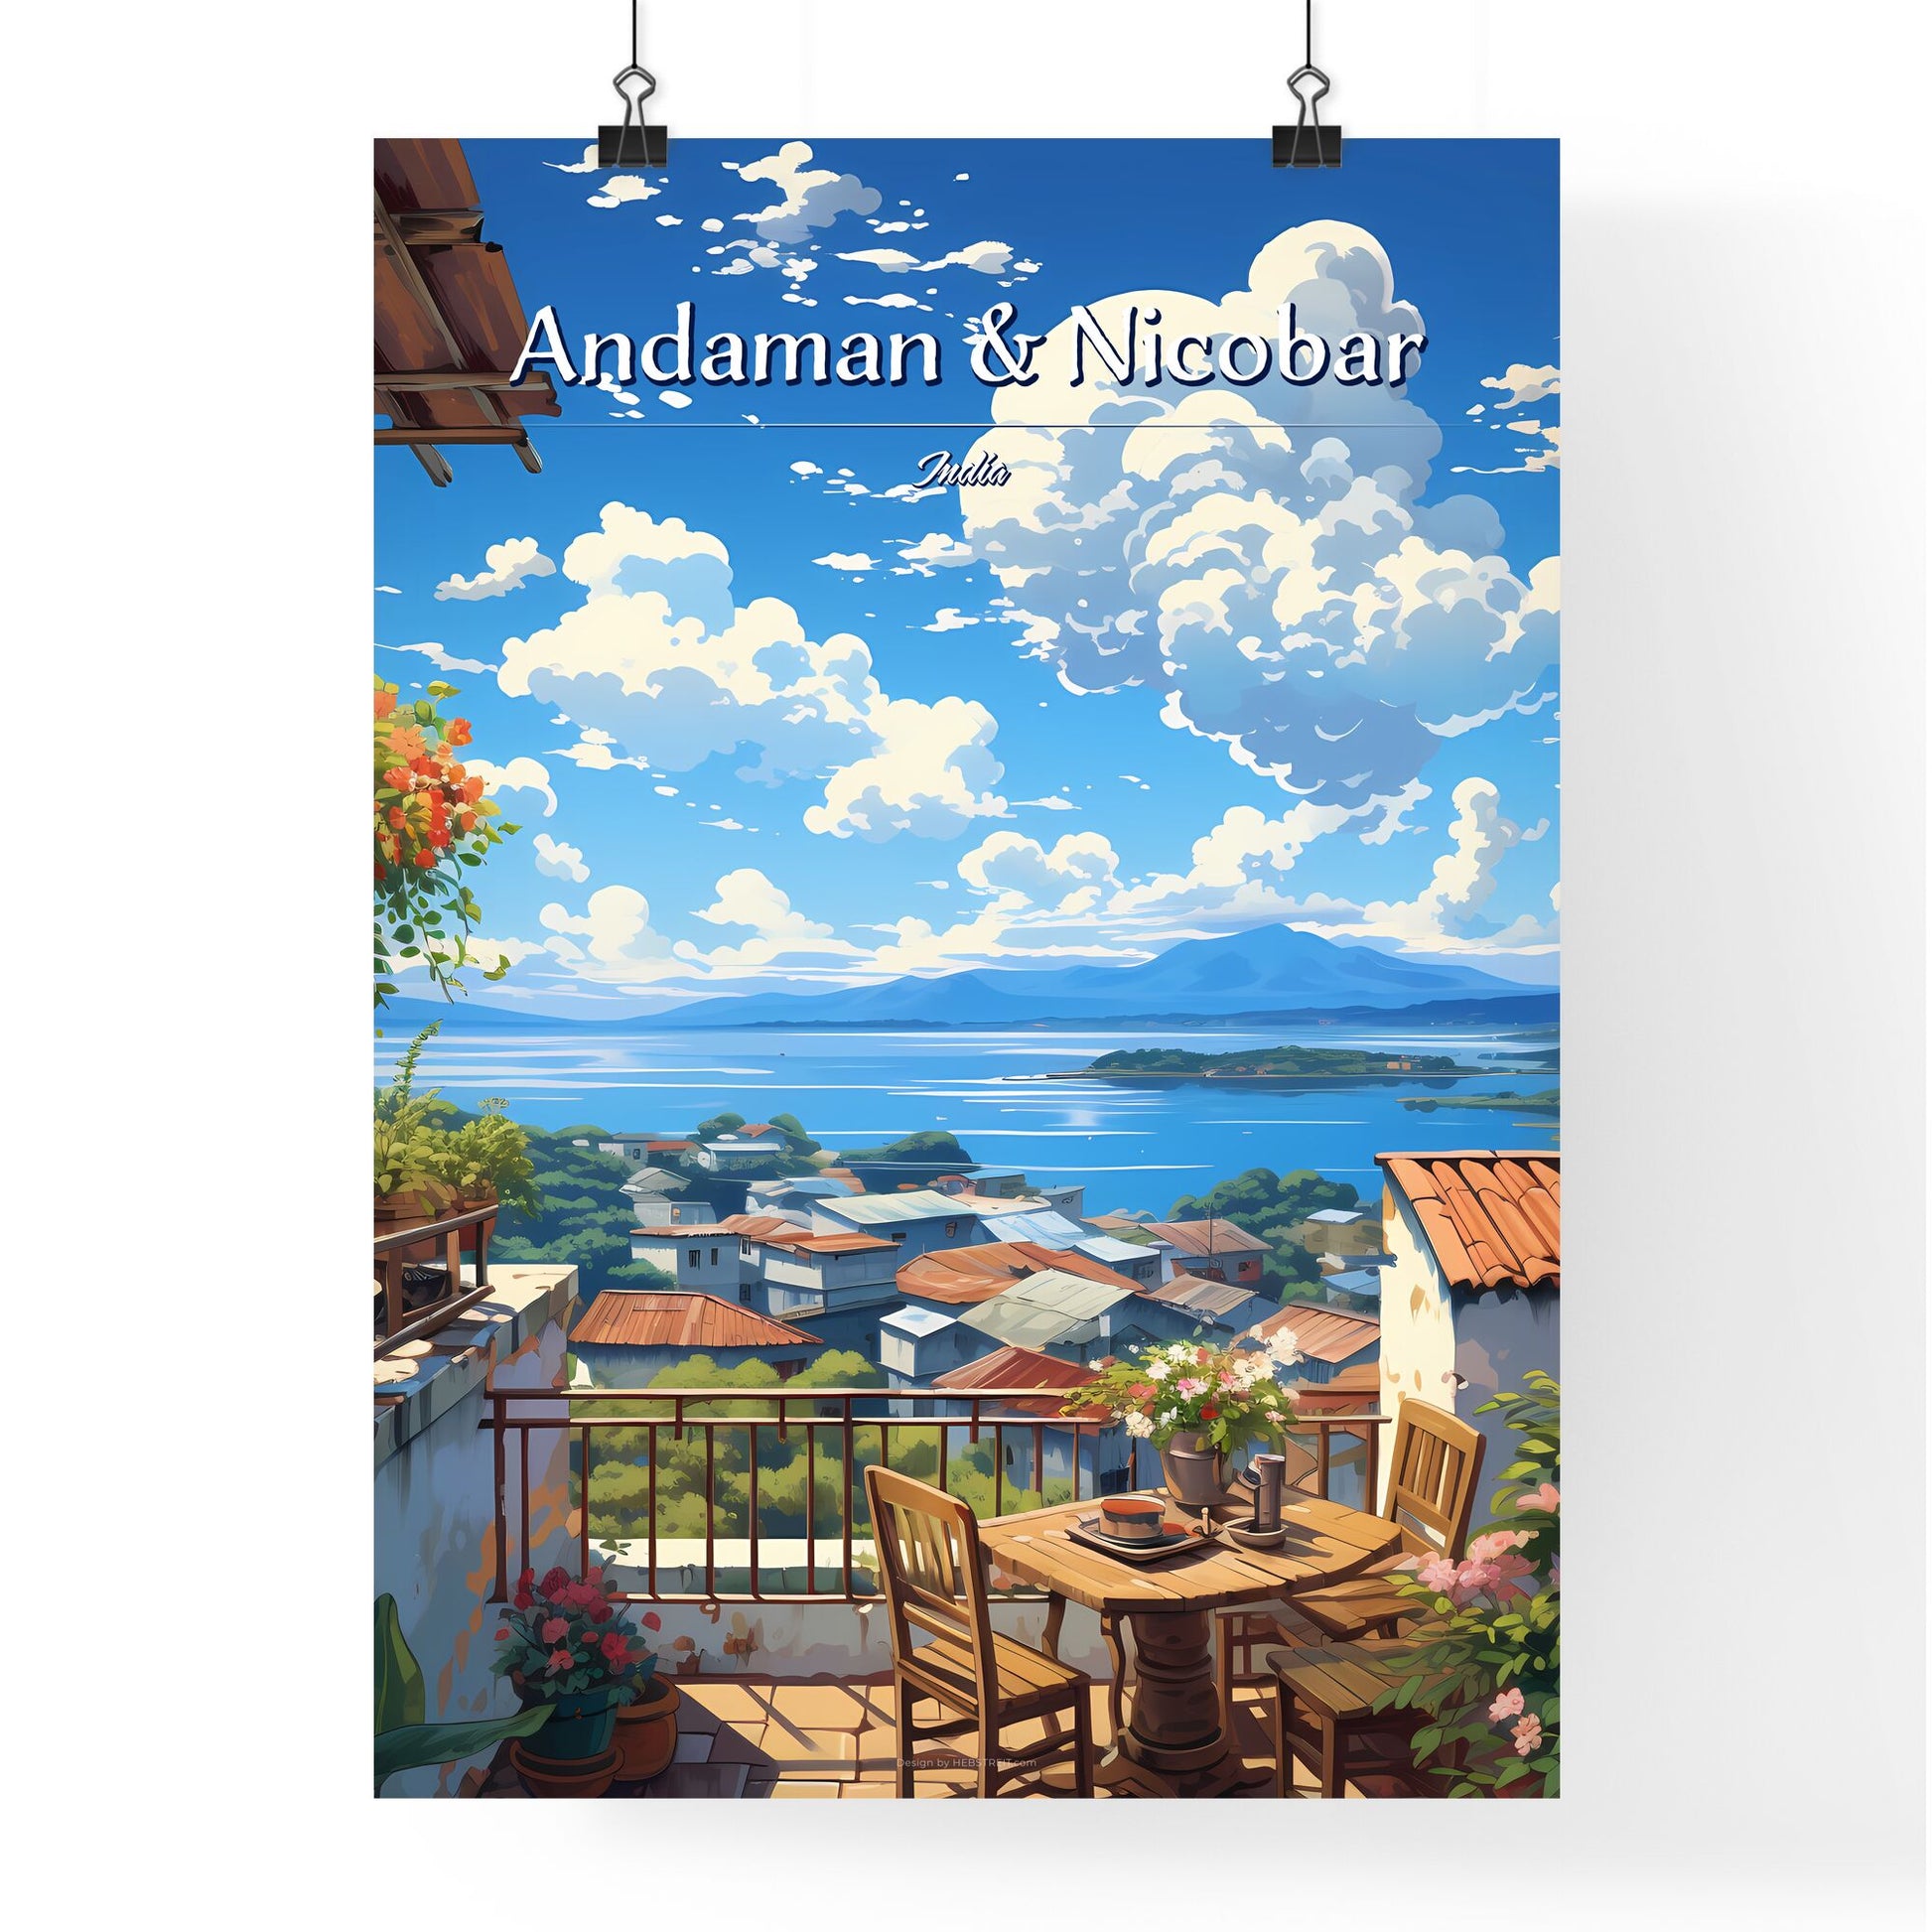 On the roofs of The Andaman & Nicobar Islands, India - Art print of a view of a town from a balcony Default Title